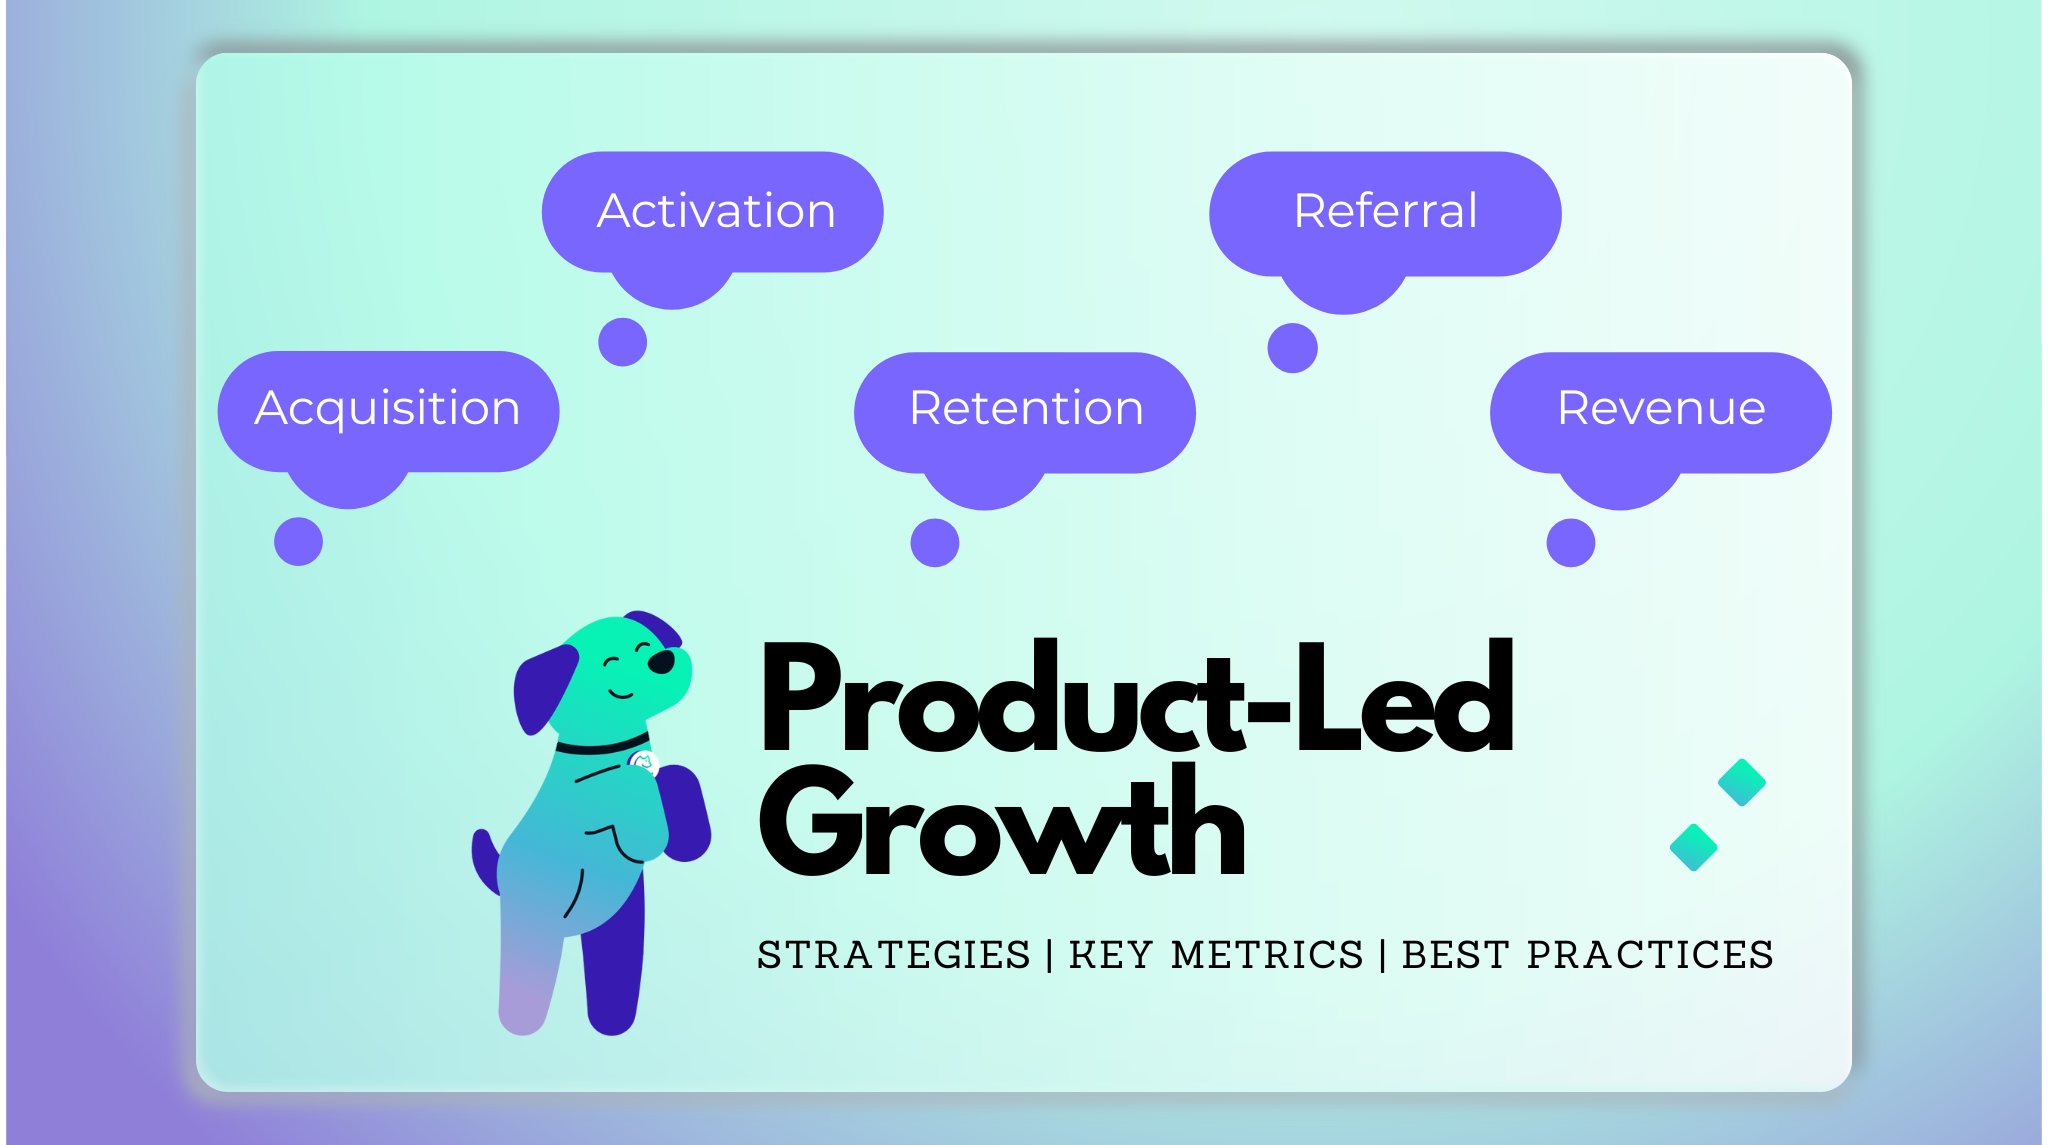 Essential Metrics for Product-Led Growth Companies